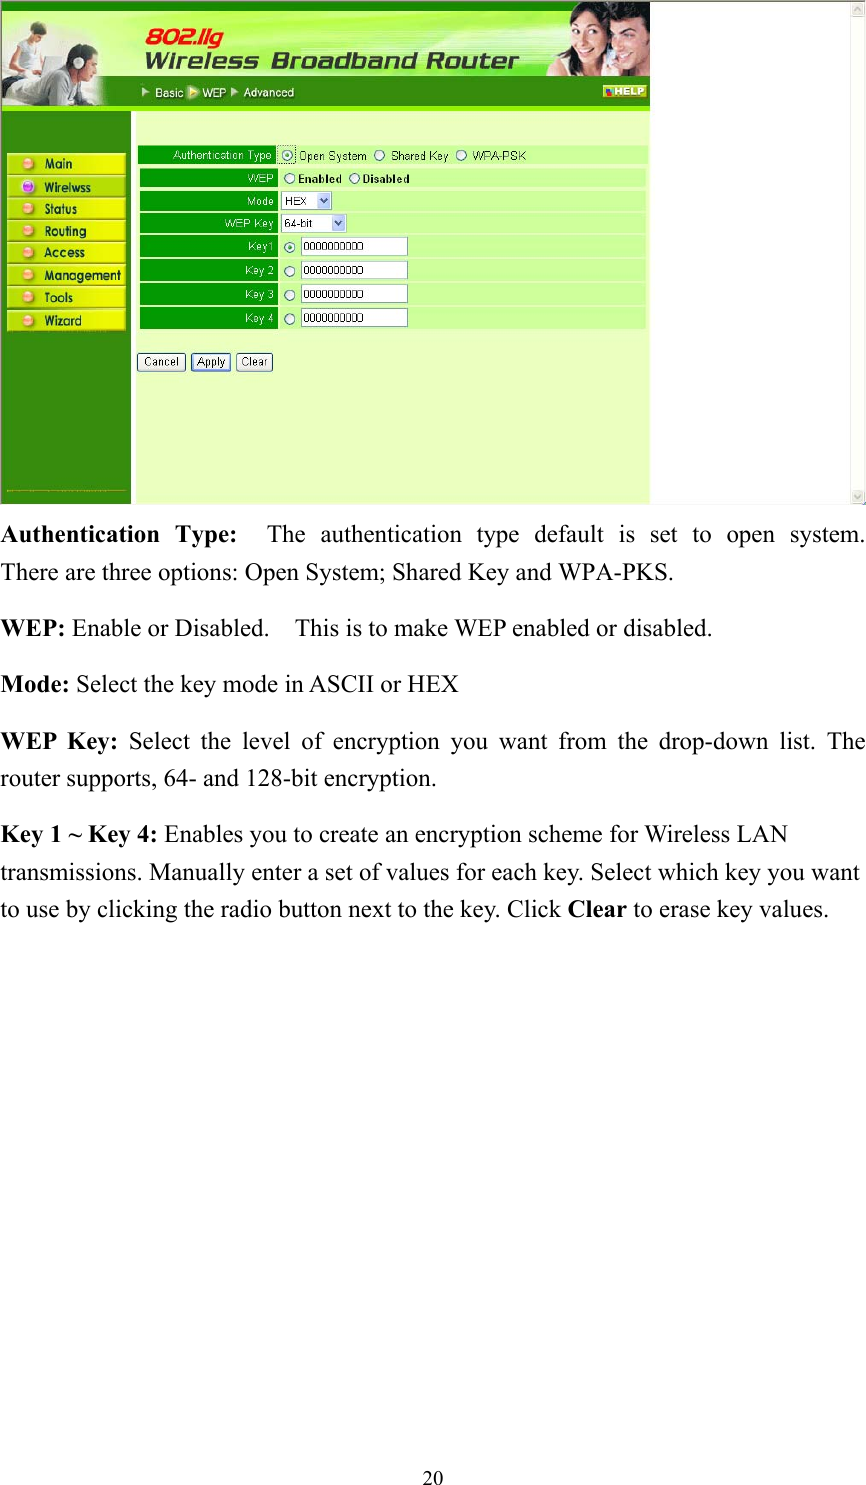  20 Authentication Type:  The authentication type default is set to open system.  There are three options: Open System; Shared Key and WPA-PKS.     WEP: Enable or Disabled.    This is to make WEP enabled or disabled. Mode: Select the key mode in ASCII or HEX WEP Key: Select the level of encryption you want from the drop-down list. The router supports, 64- and 128-bit encryption. Key 1 ~ Key 4: Enables you to create an encryption scheme for Wireless LAN transmissions. Manually enter a set of values for each key. Select which key you want to use by clicking the radio button next to the key. Click Clear to erase key values.  